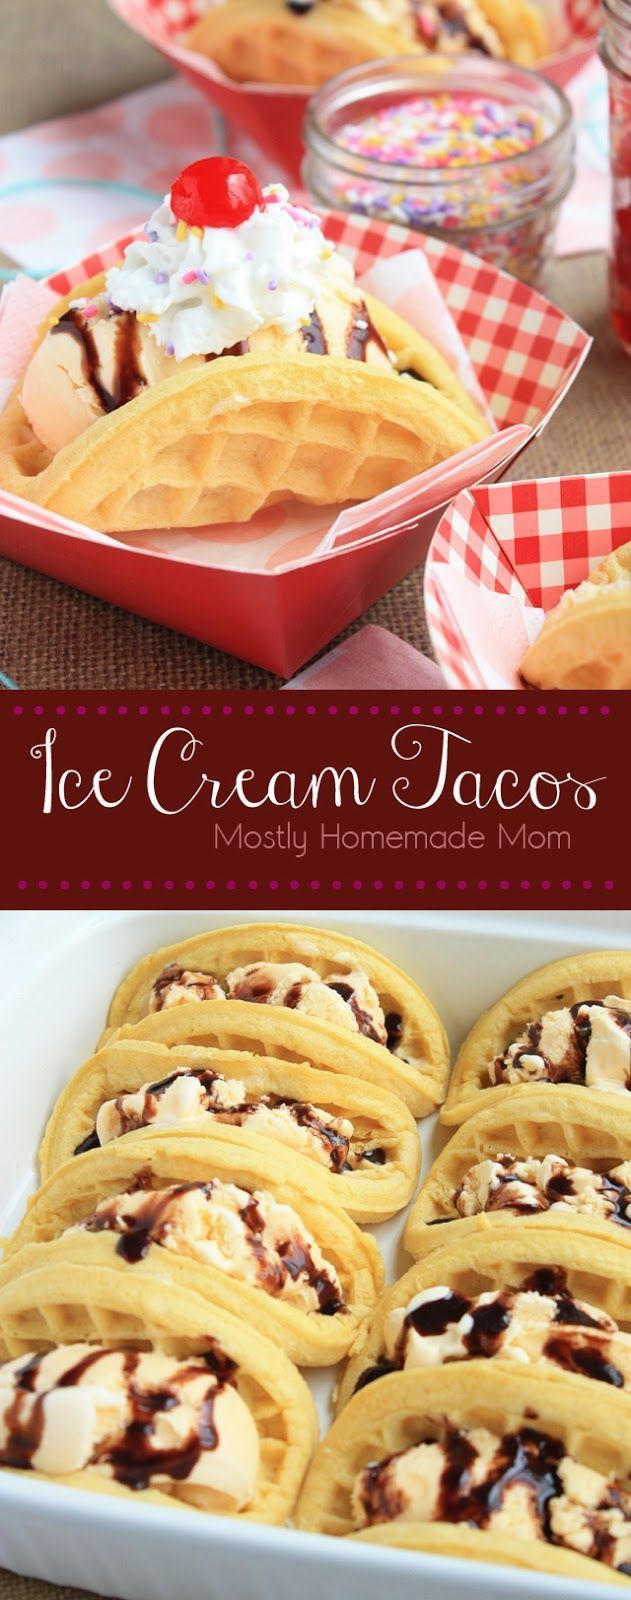 Ice Cream Tacos – Waffles filled with ice cream and toppings make a fun twist on dessert tacos! This o